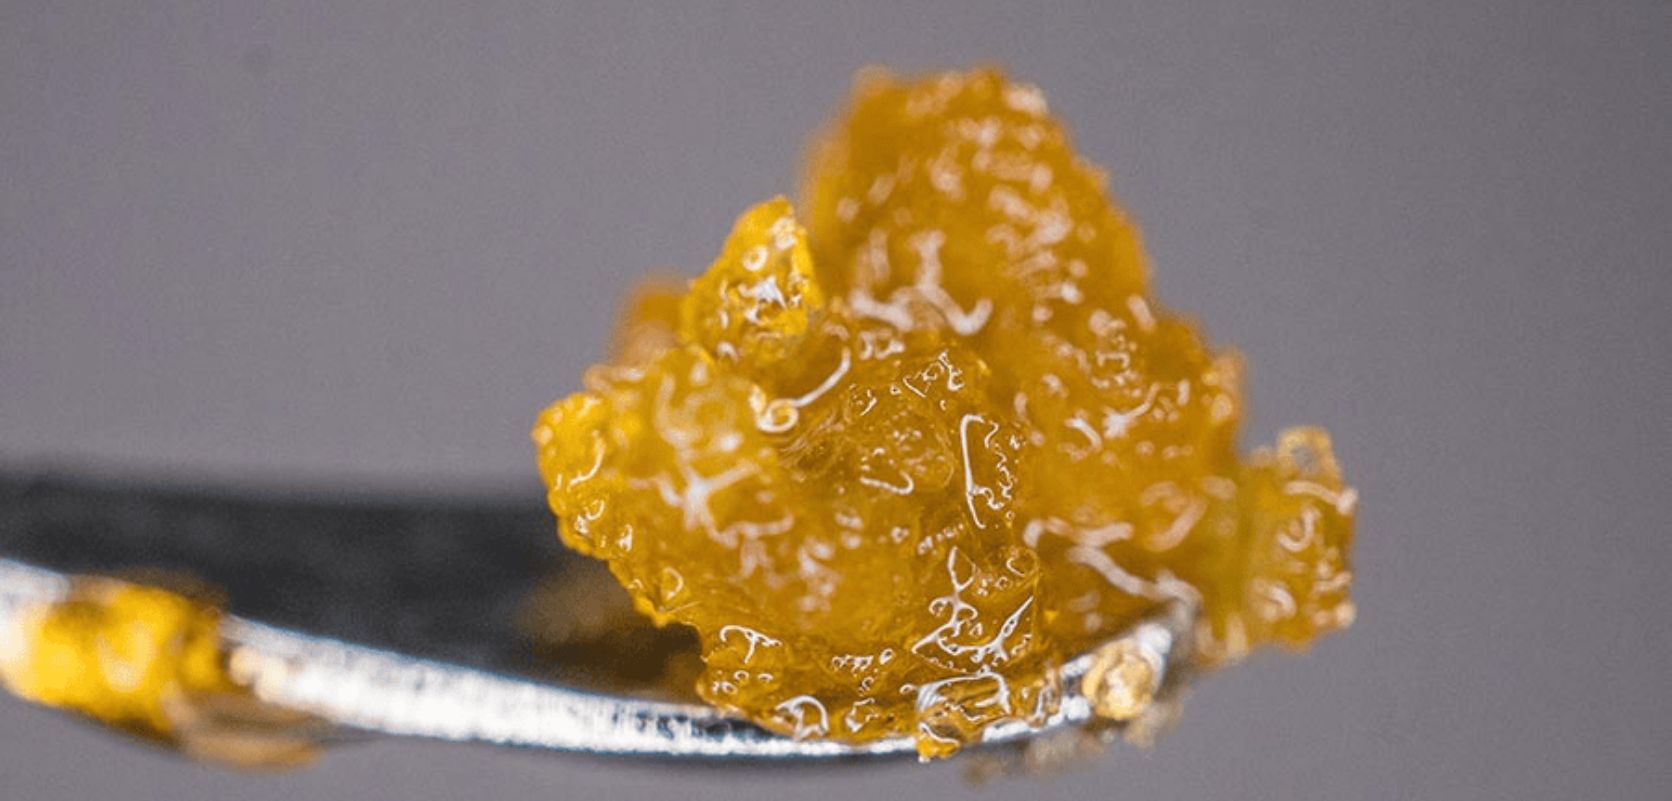 Thanks for joining us in exploring the world of Living Resin. We've had a blast sharing this captivating strain with you, and we hope you've enjoyed the journey as much as we have.